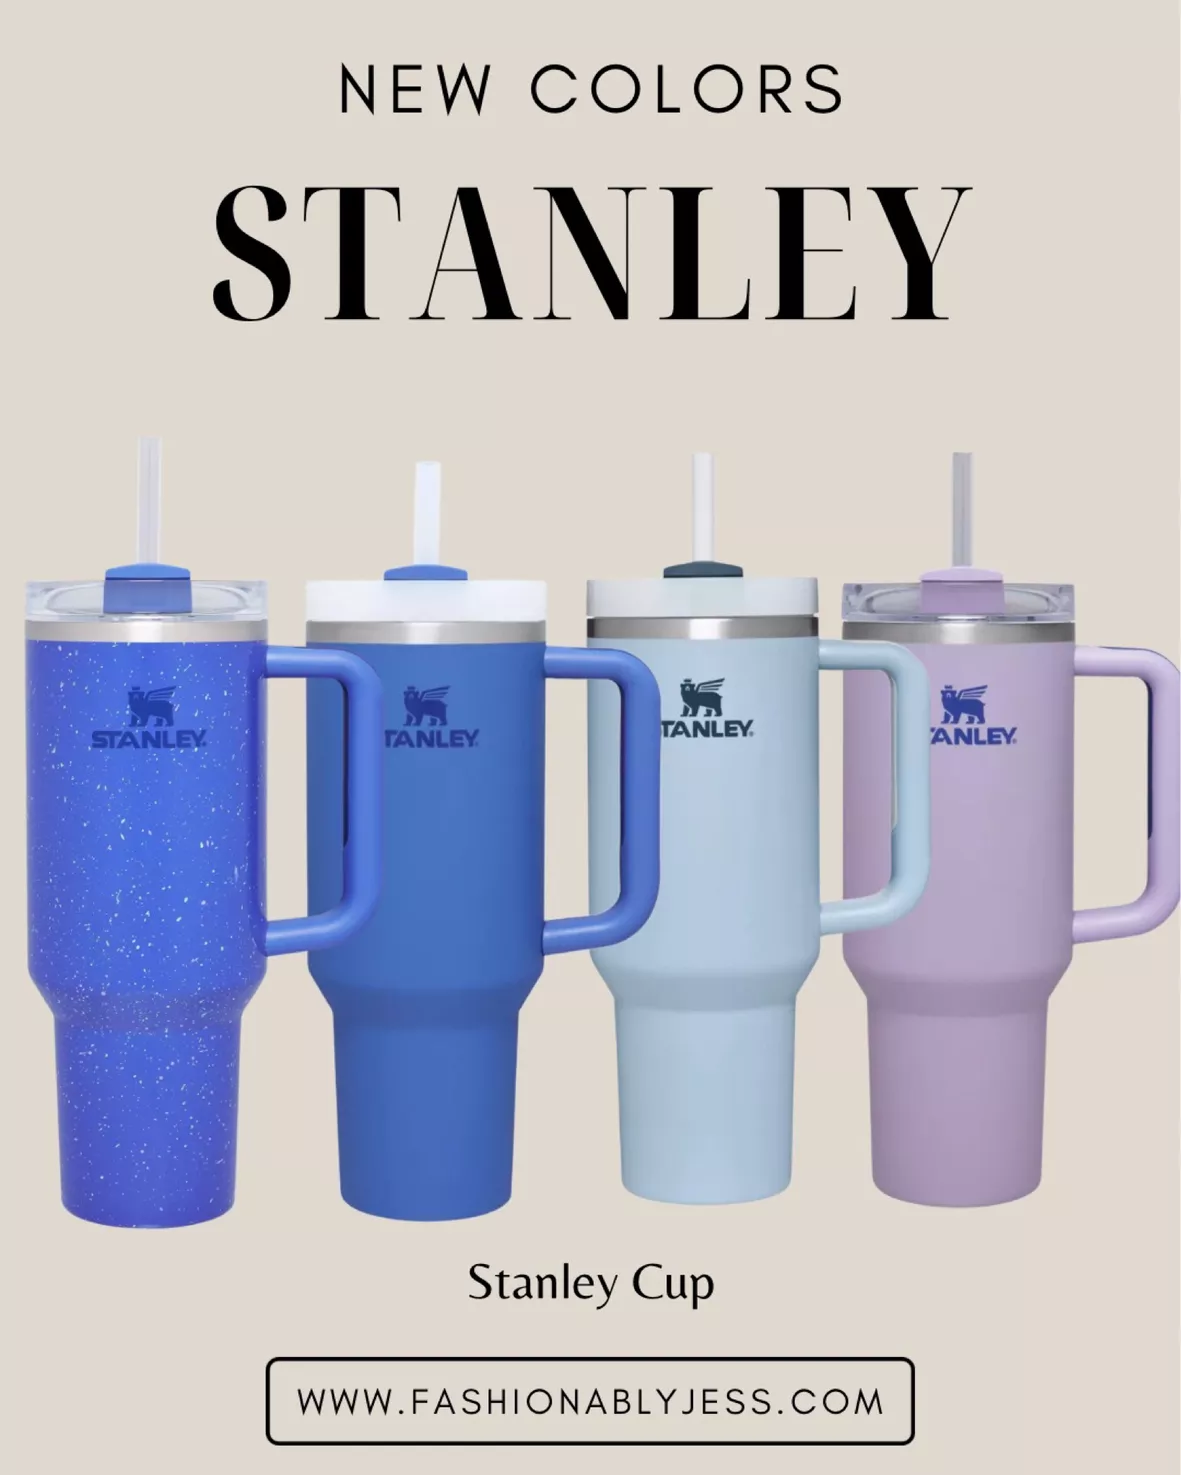 Stanley - A Quencher for every shade of you! Available now at